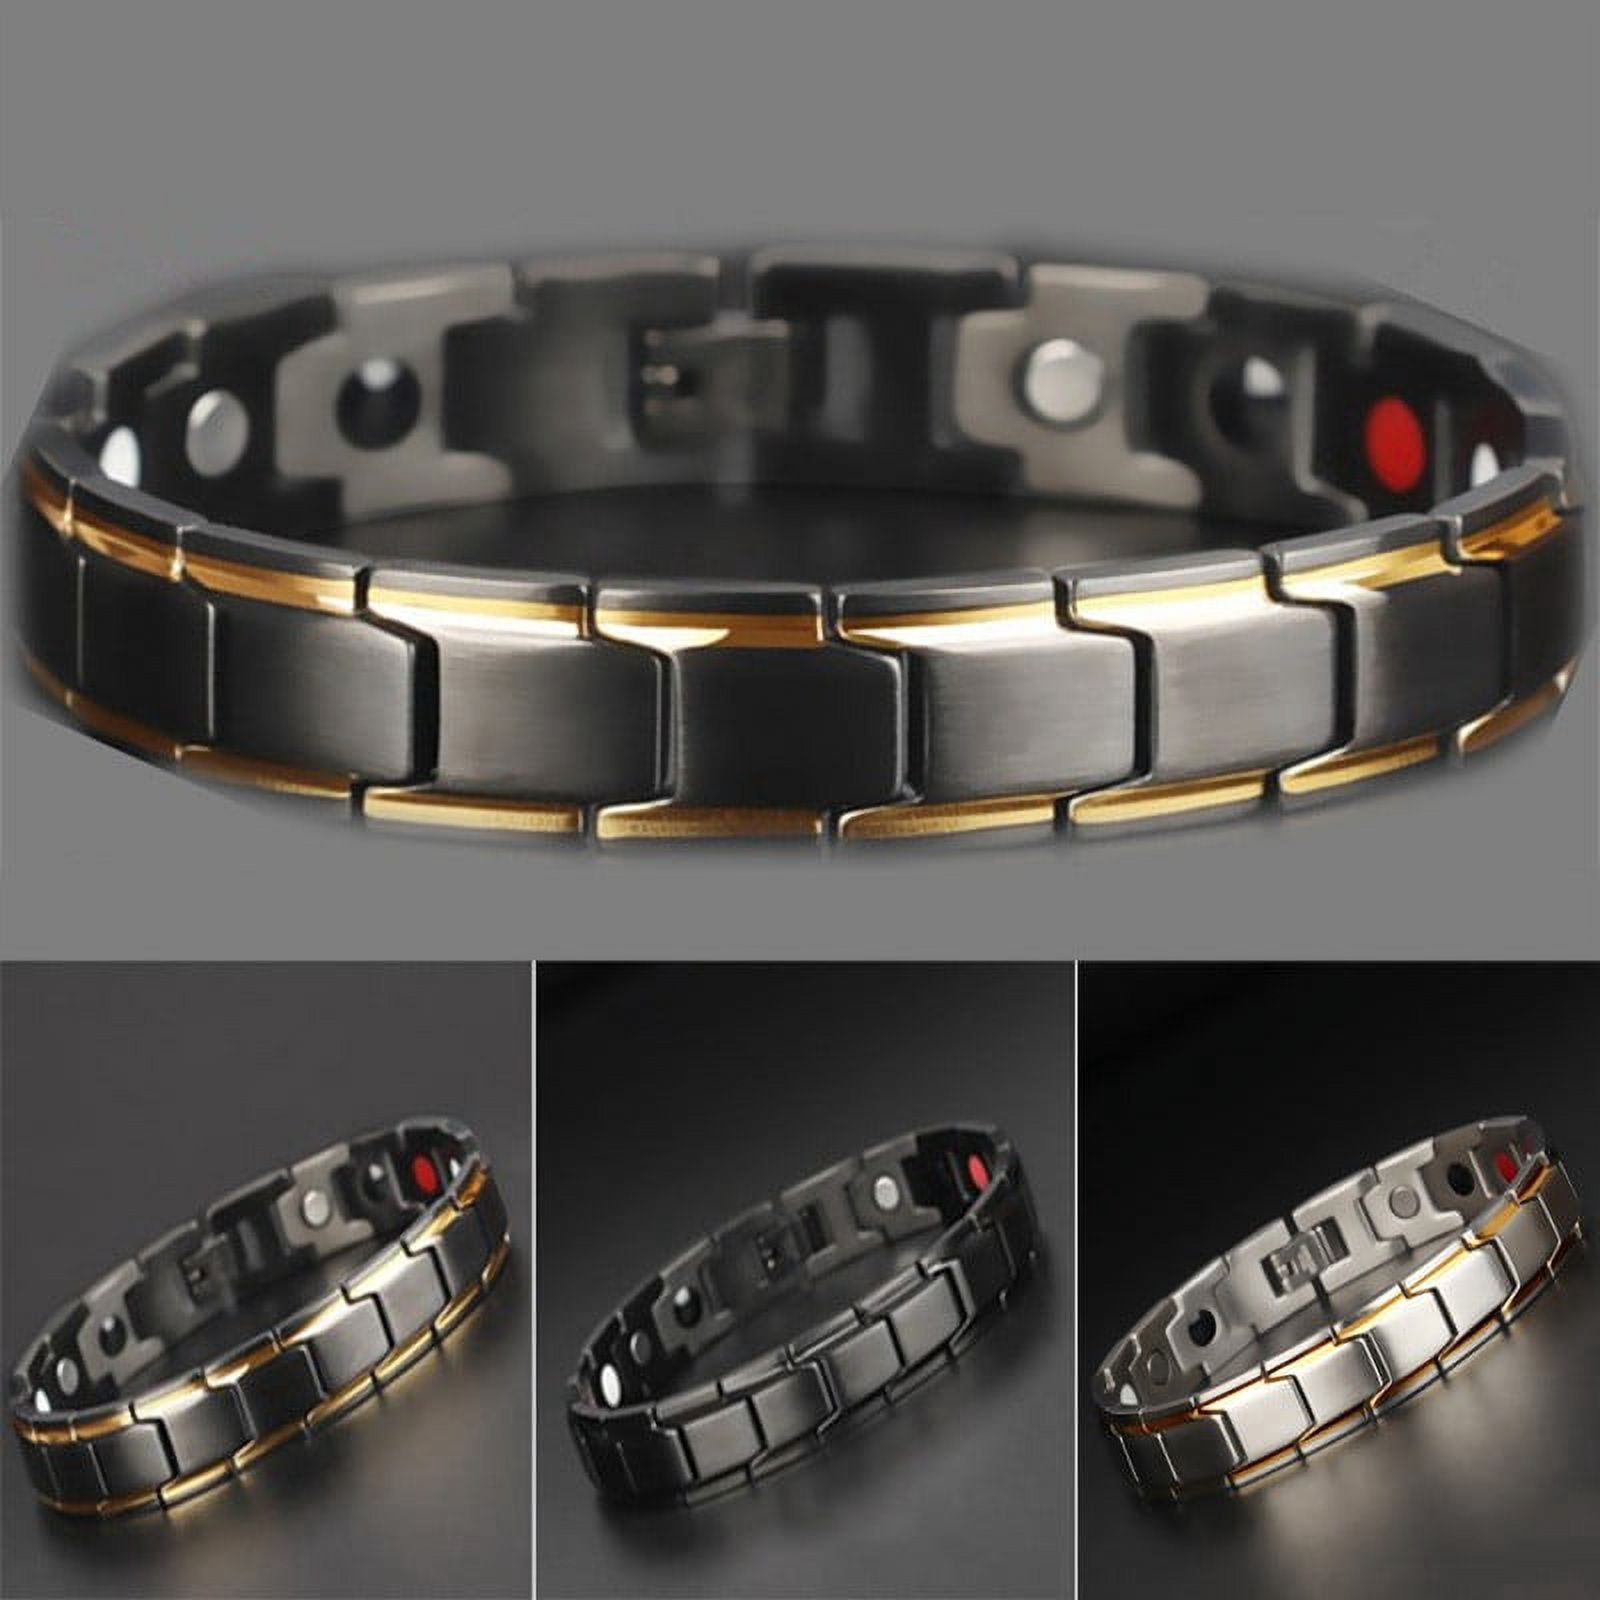 Top Bio Magnetic Bracelet Dealers in Nampally, Hyderabad - Justdial-chantamquoc.vn